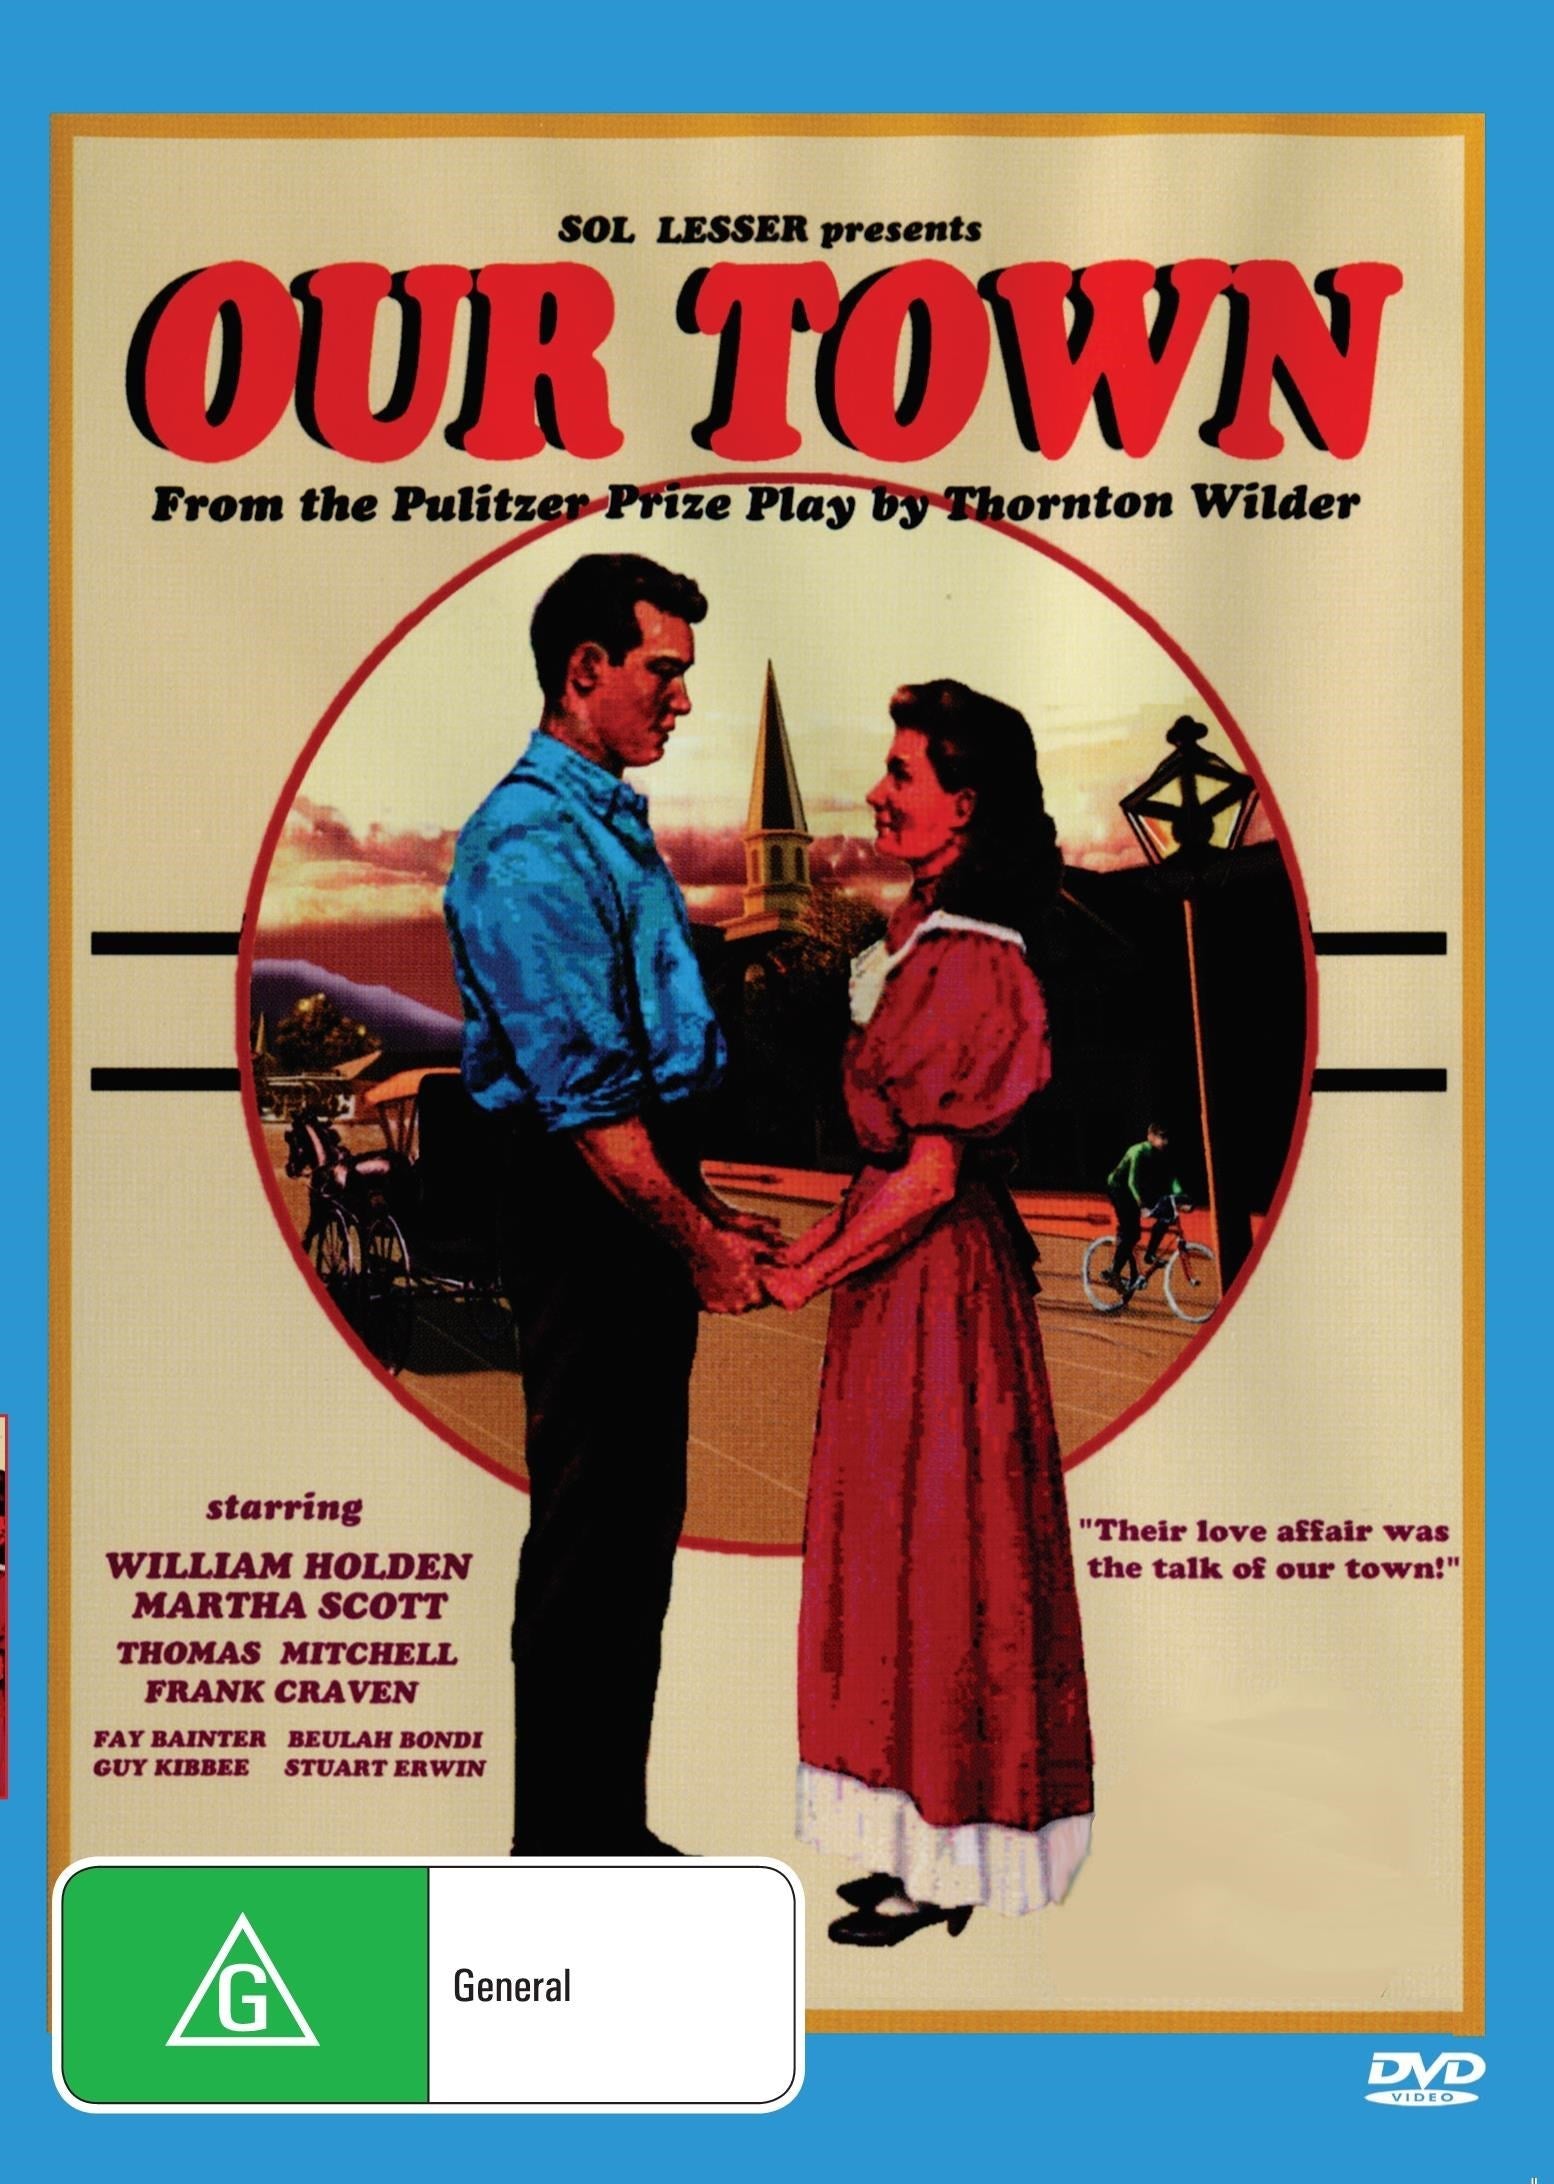 Our Town rareandcollectibledvds